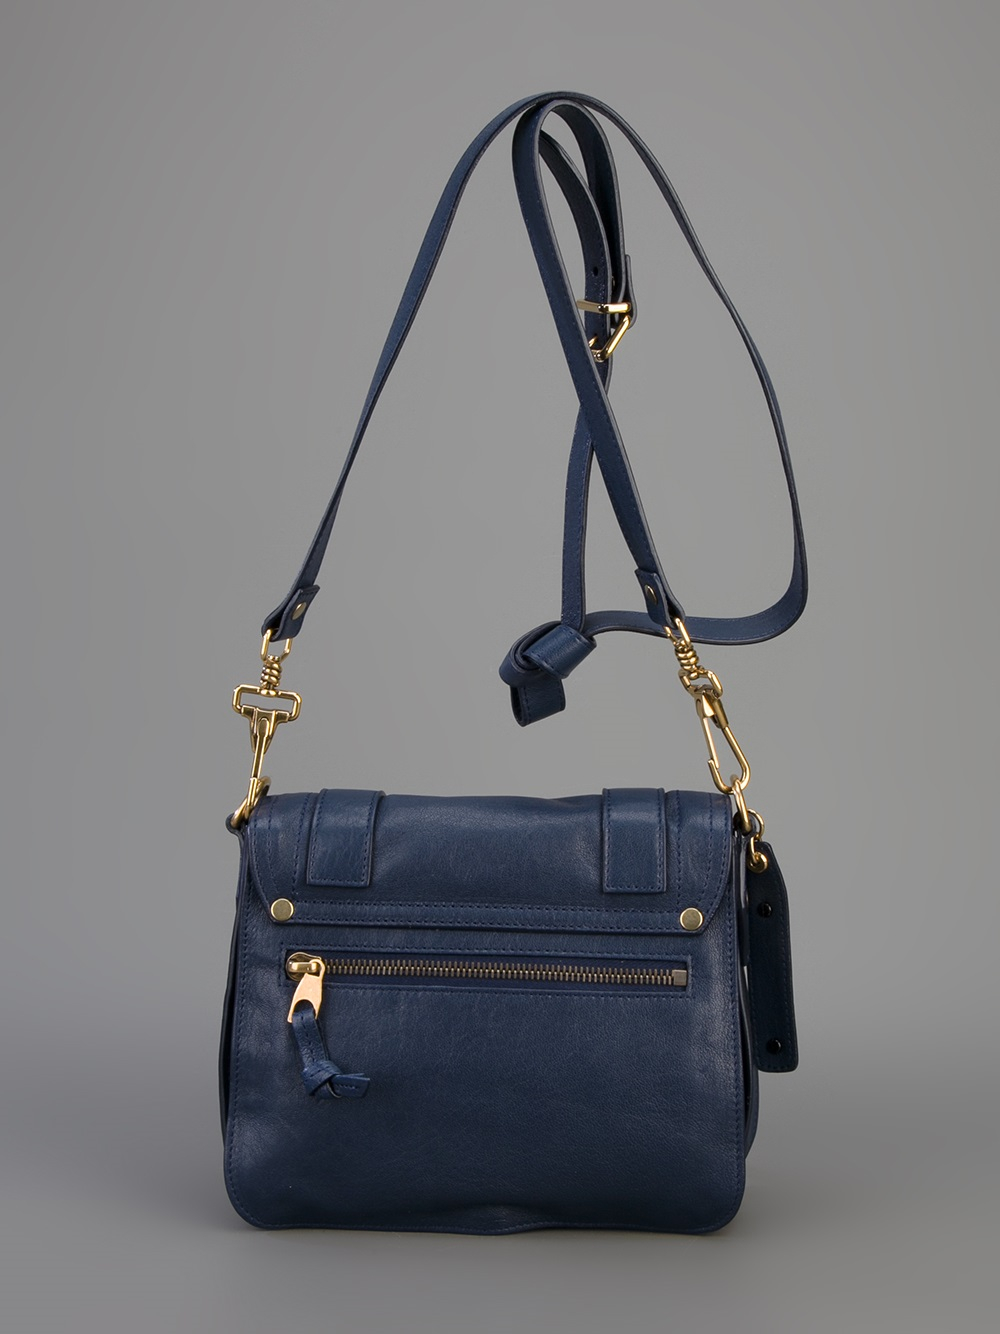 Ps1 tiny leather satchel Proenza Schouler Blue in Leather - 35501221